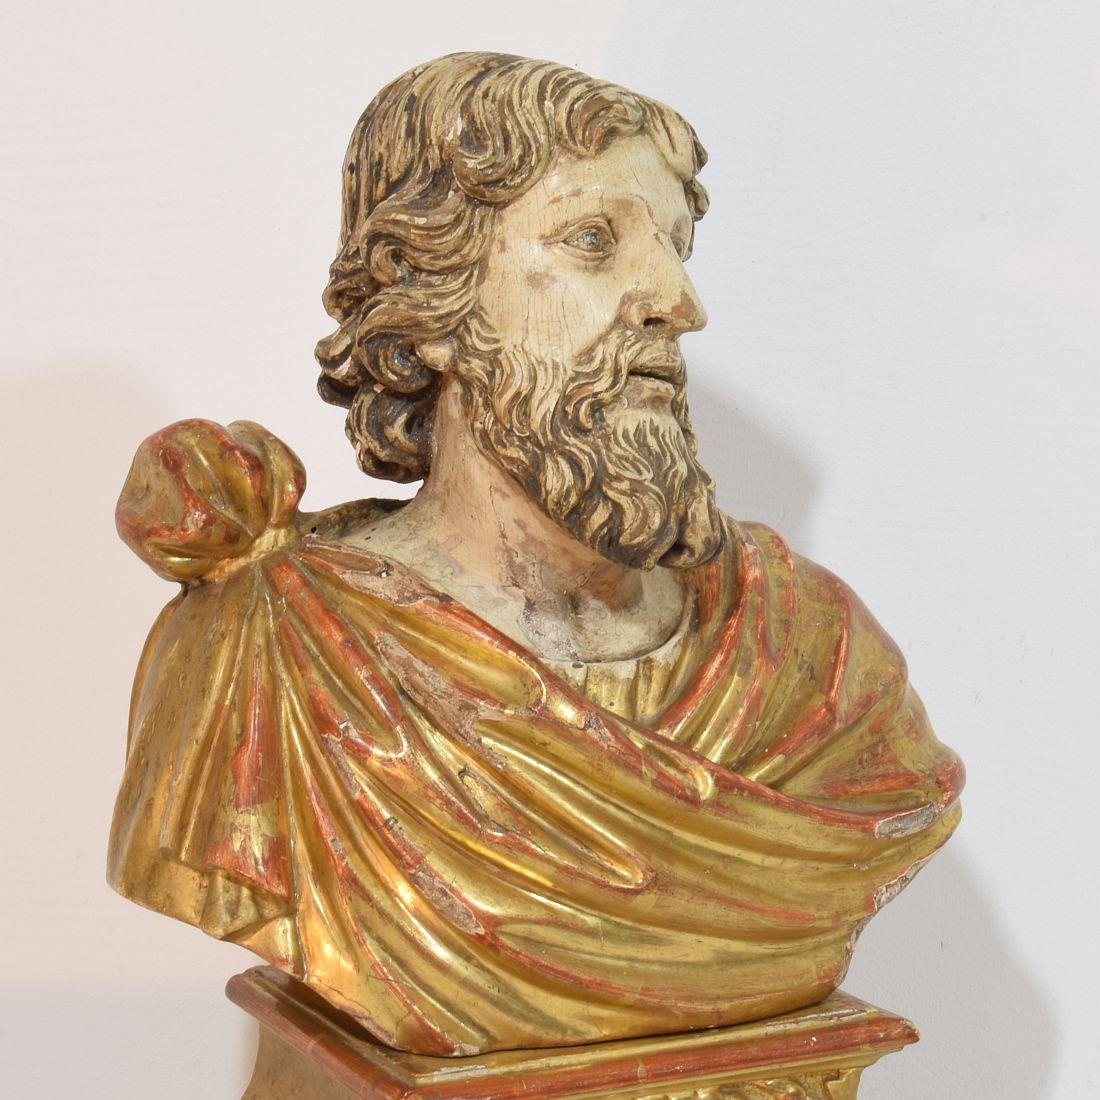 17th-18th Century Italian Hand carved Wooden Reliquary Bust of a Saint For Sale 3